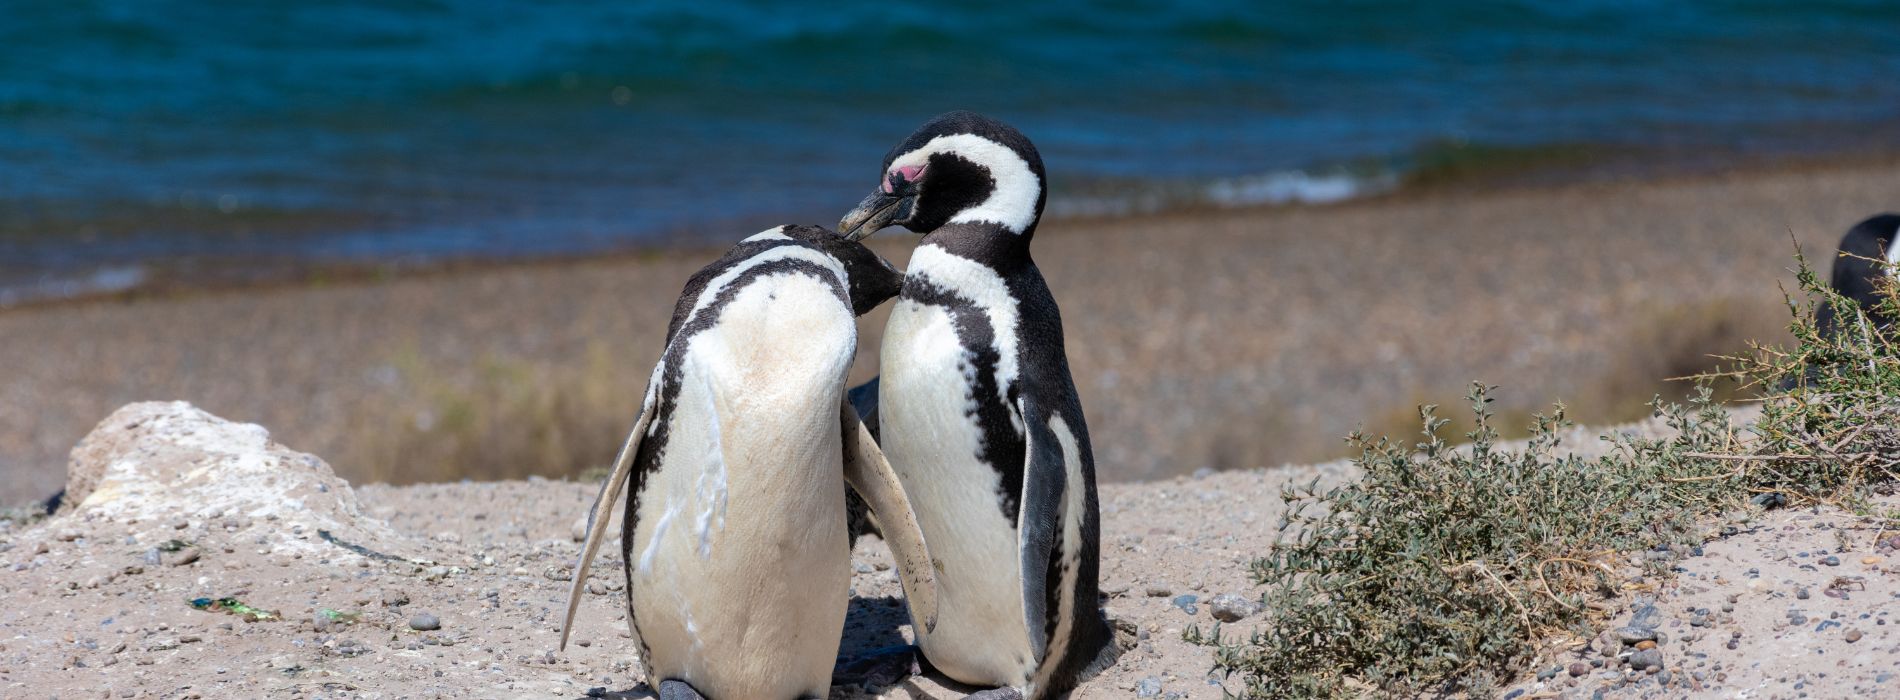 Magellanic Penguin Biography: A Playful Journey through the Life of this Fascinating Species